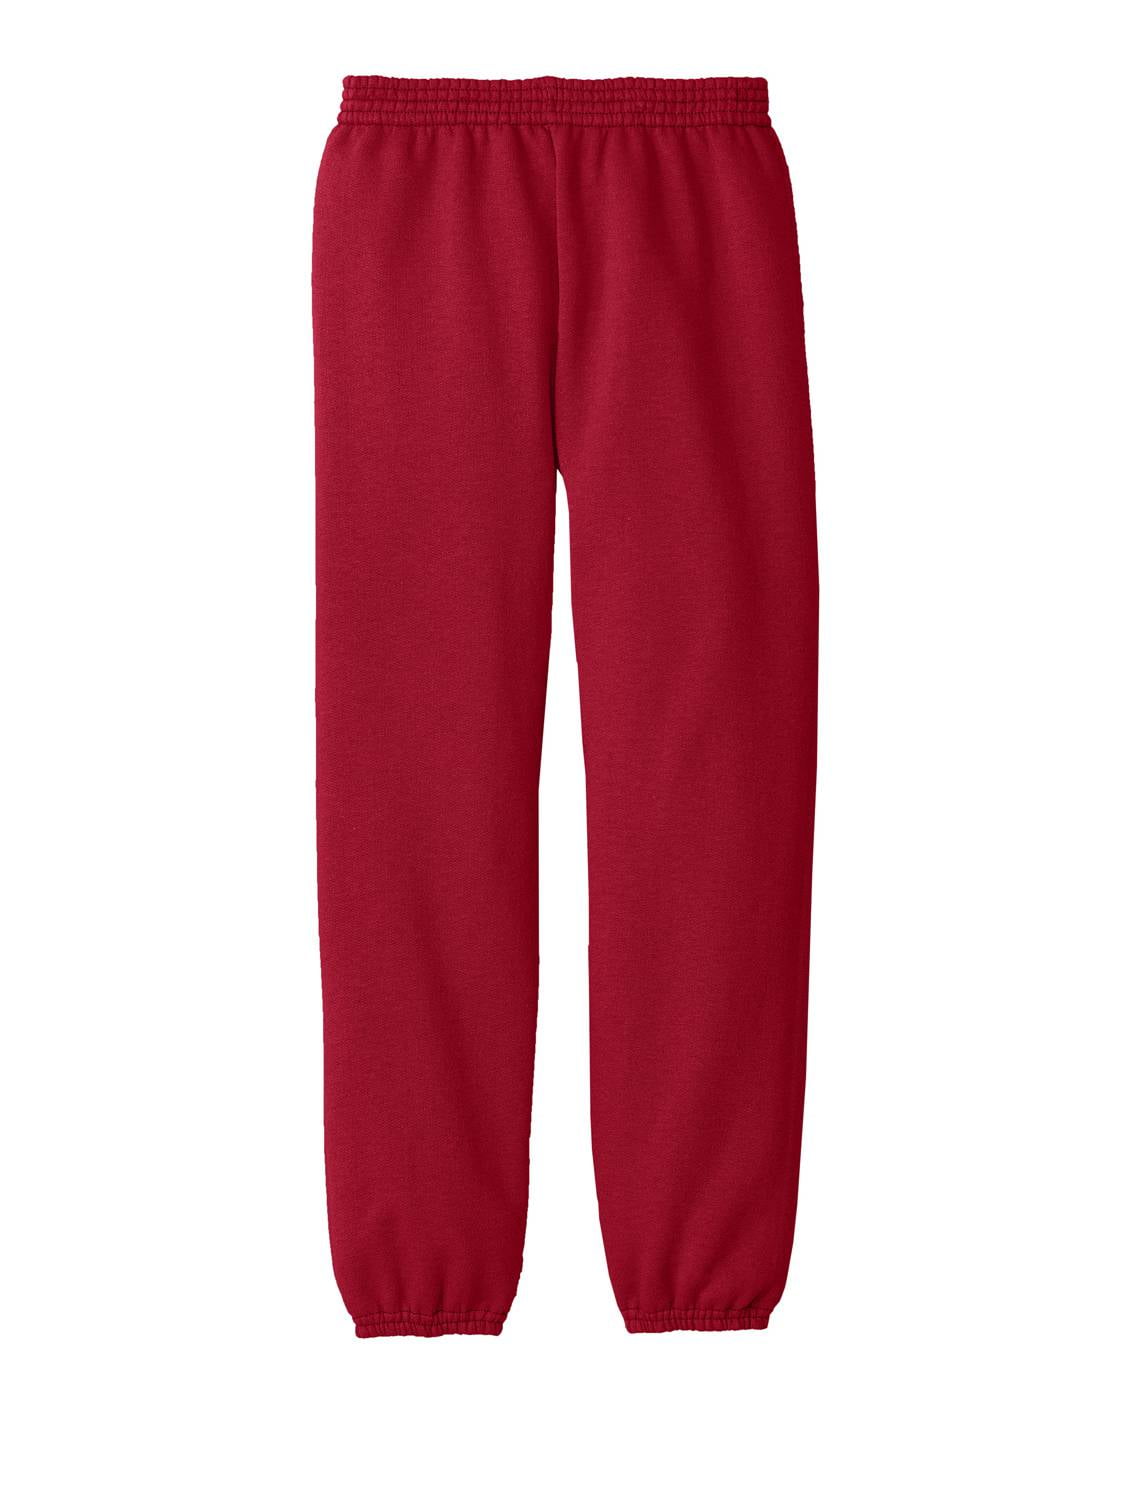 colsie Solid Red Sweatpants Size XL - 20% off